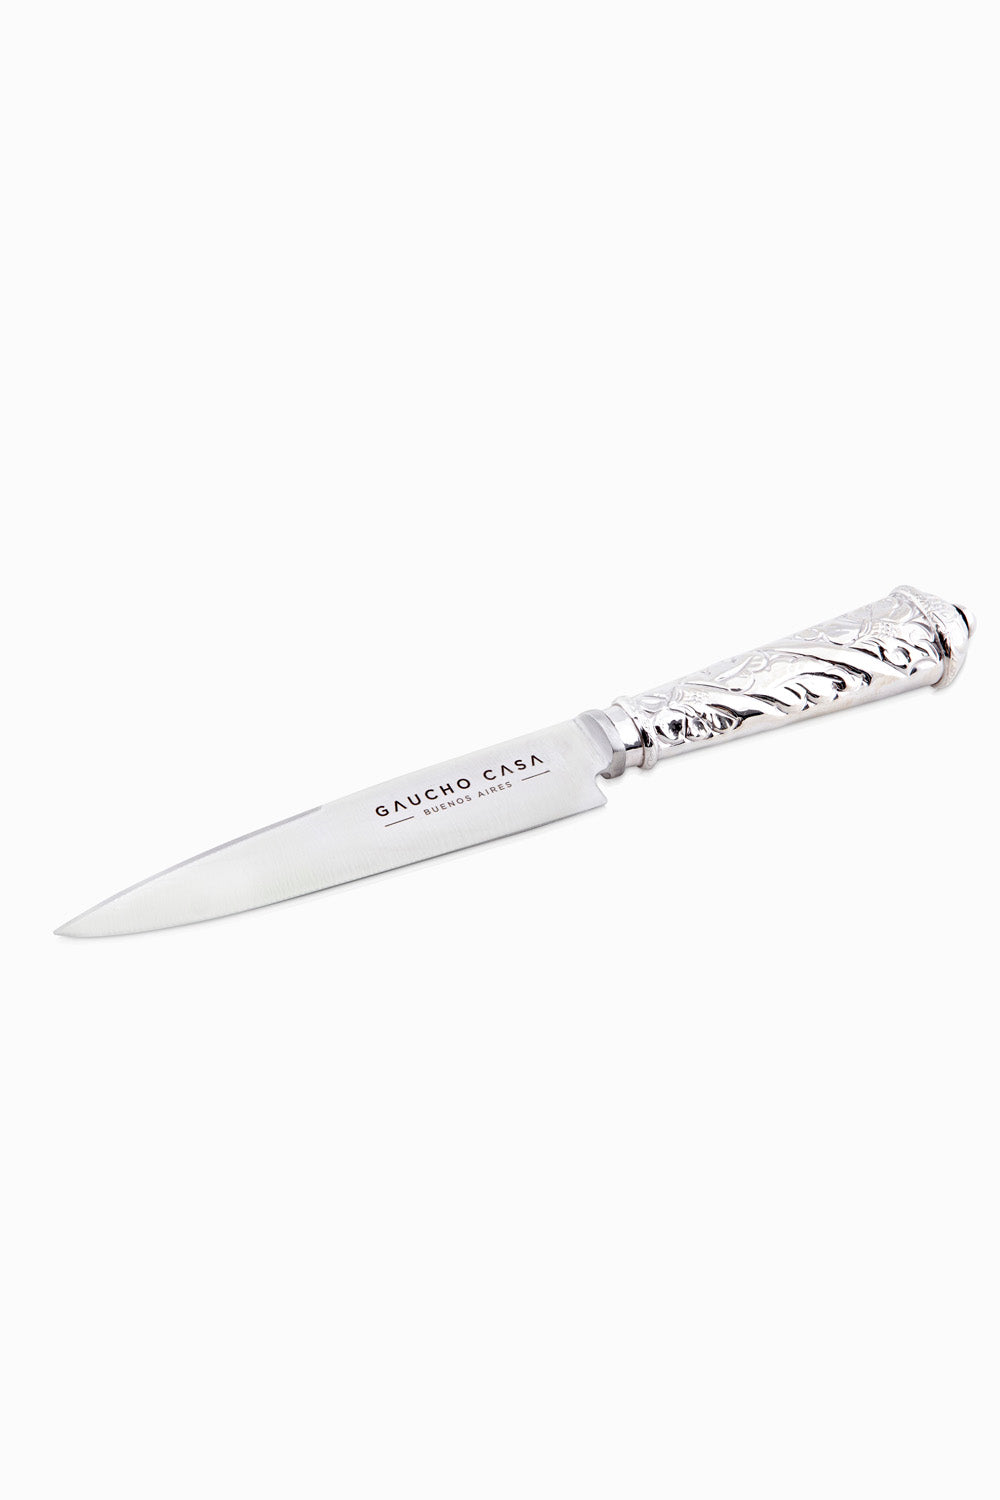 Luxury Tandil Knife With Ceibo Flower and Spiral Adorned Silver Coated Handle and Sheath